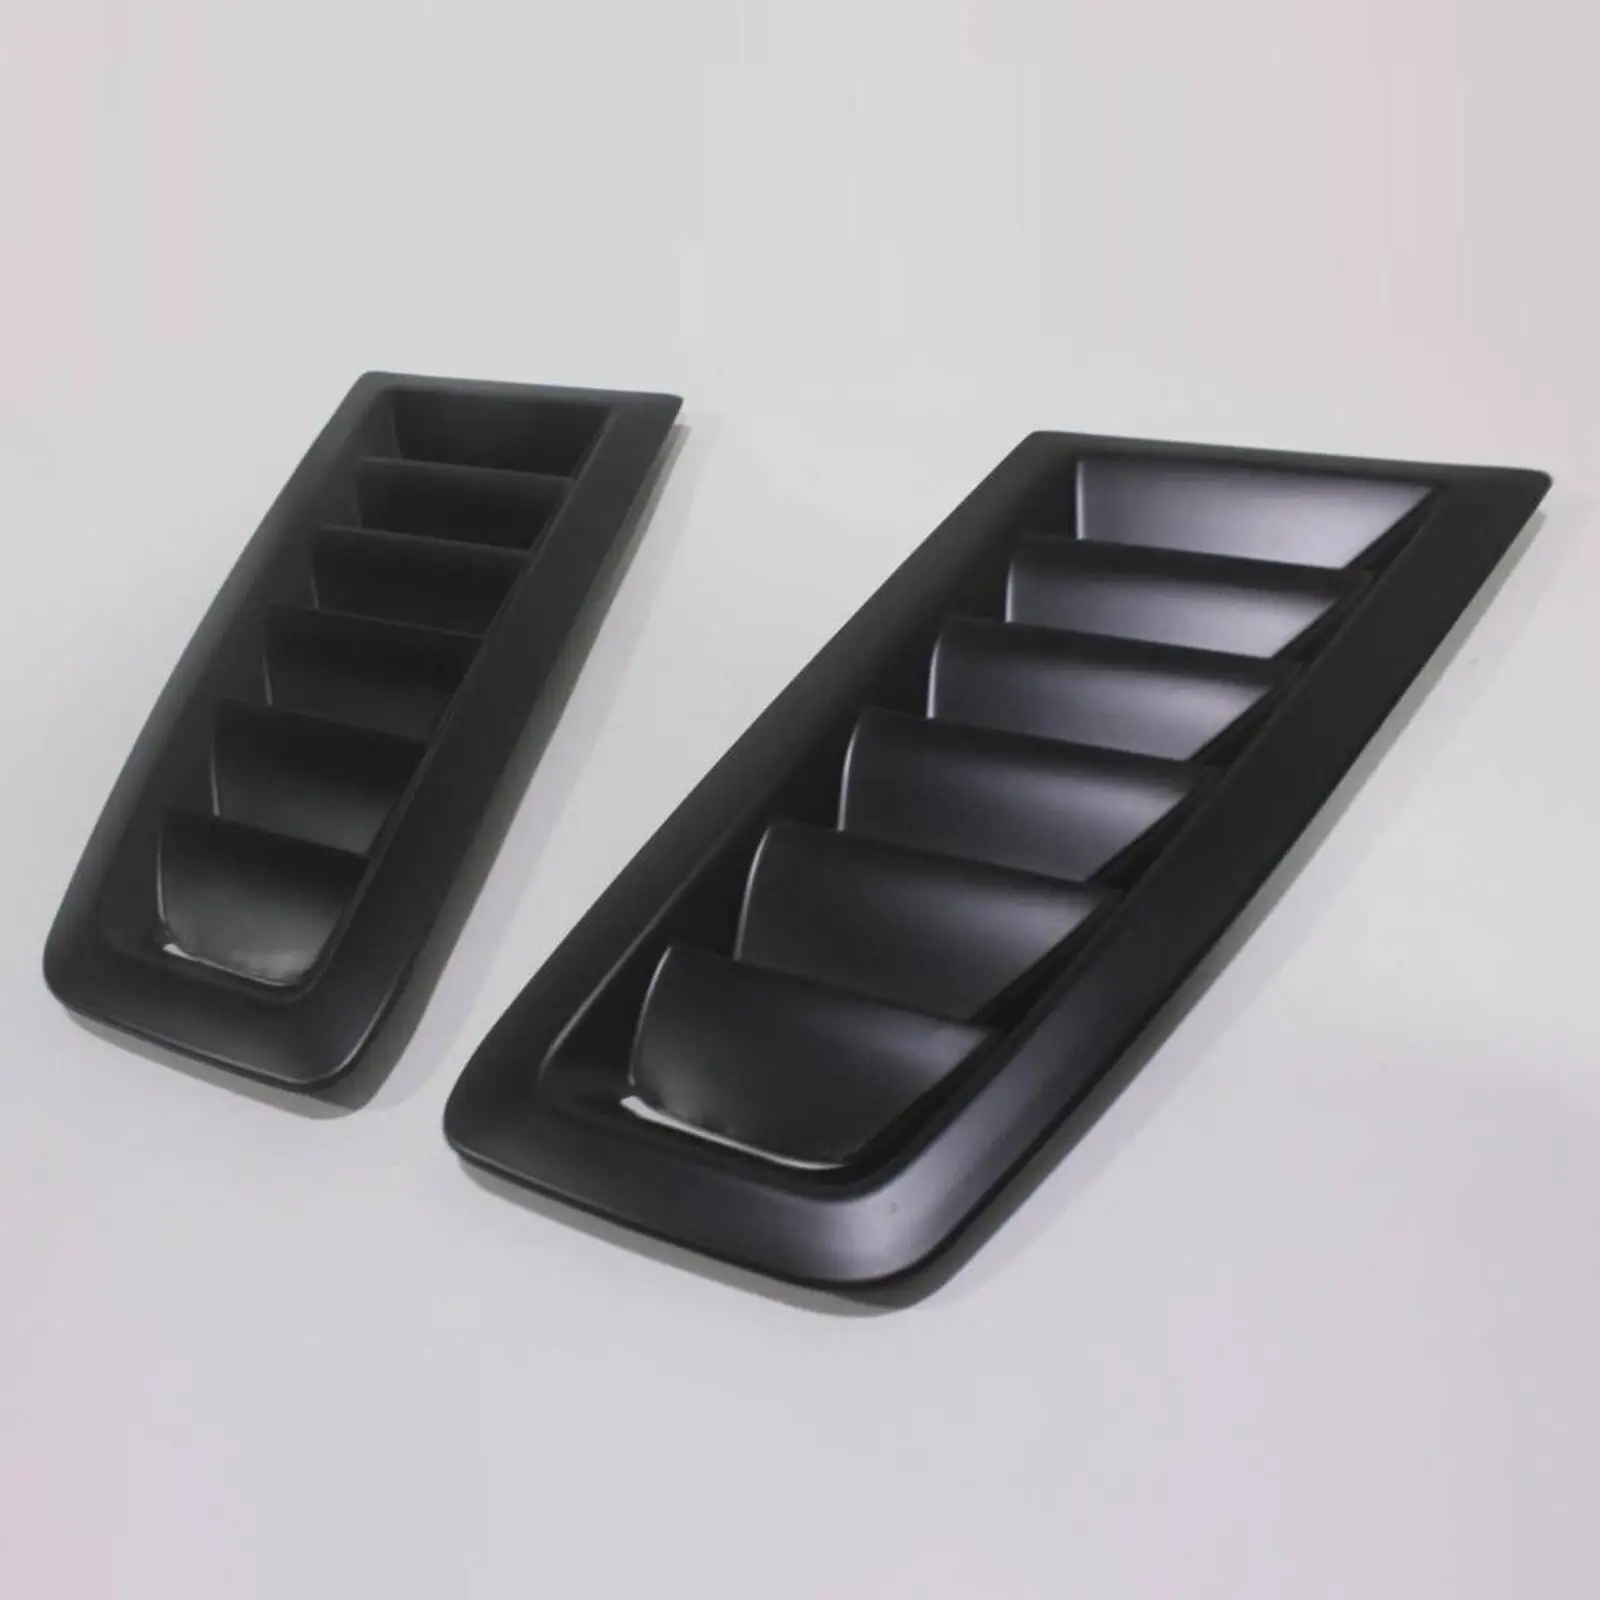 2x Bonnet Air Vent Hood Cover Replacement for Ford Focus RS Style